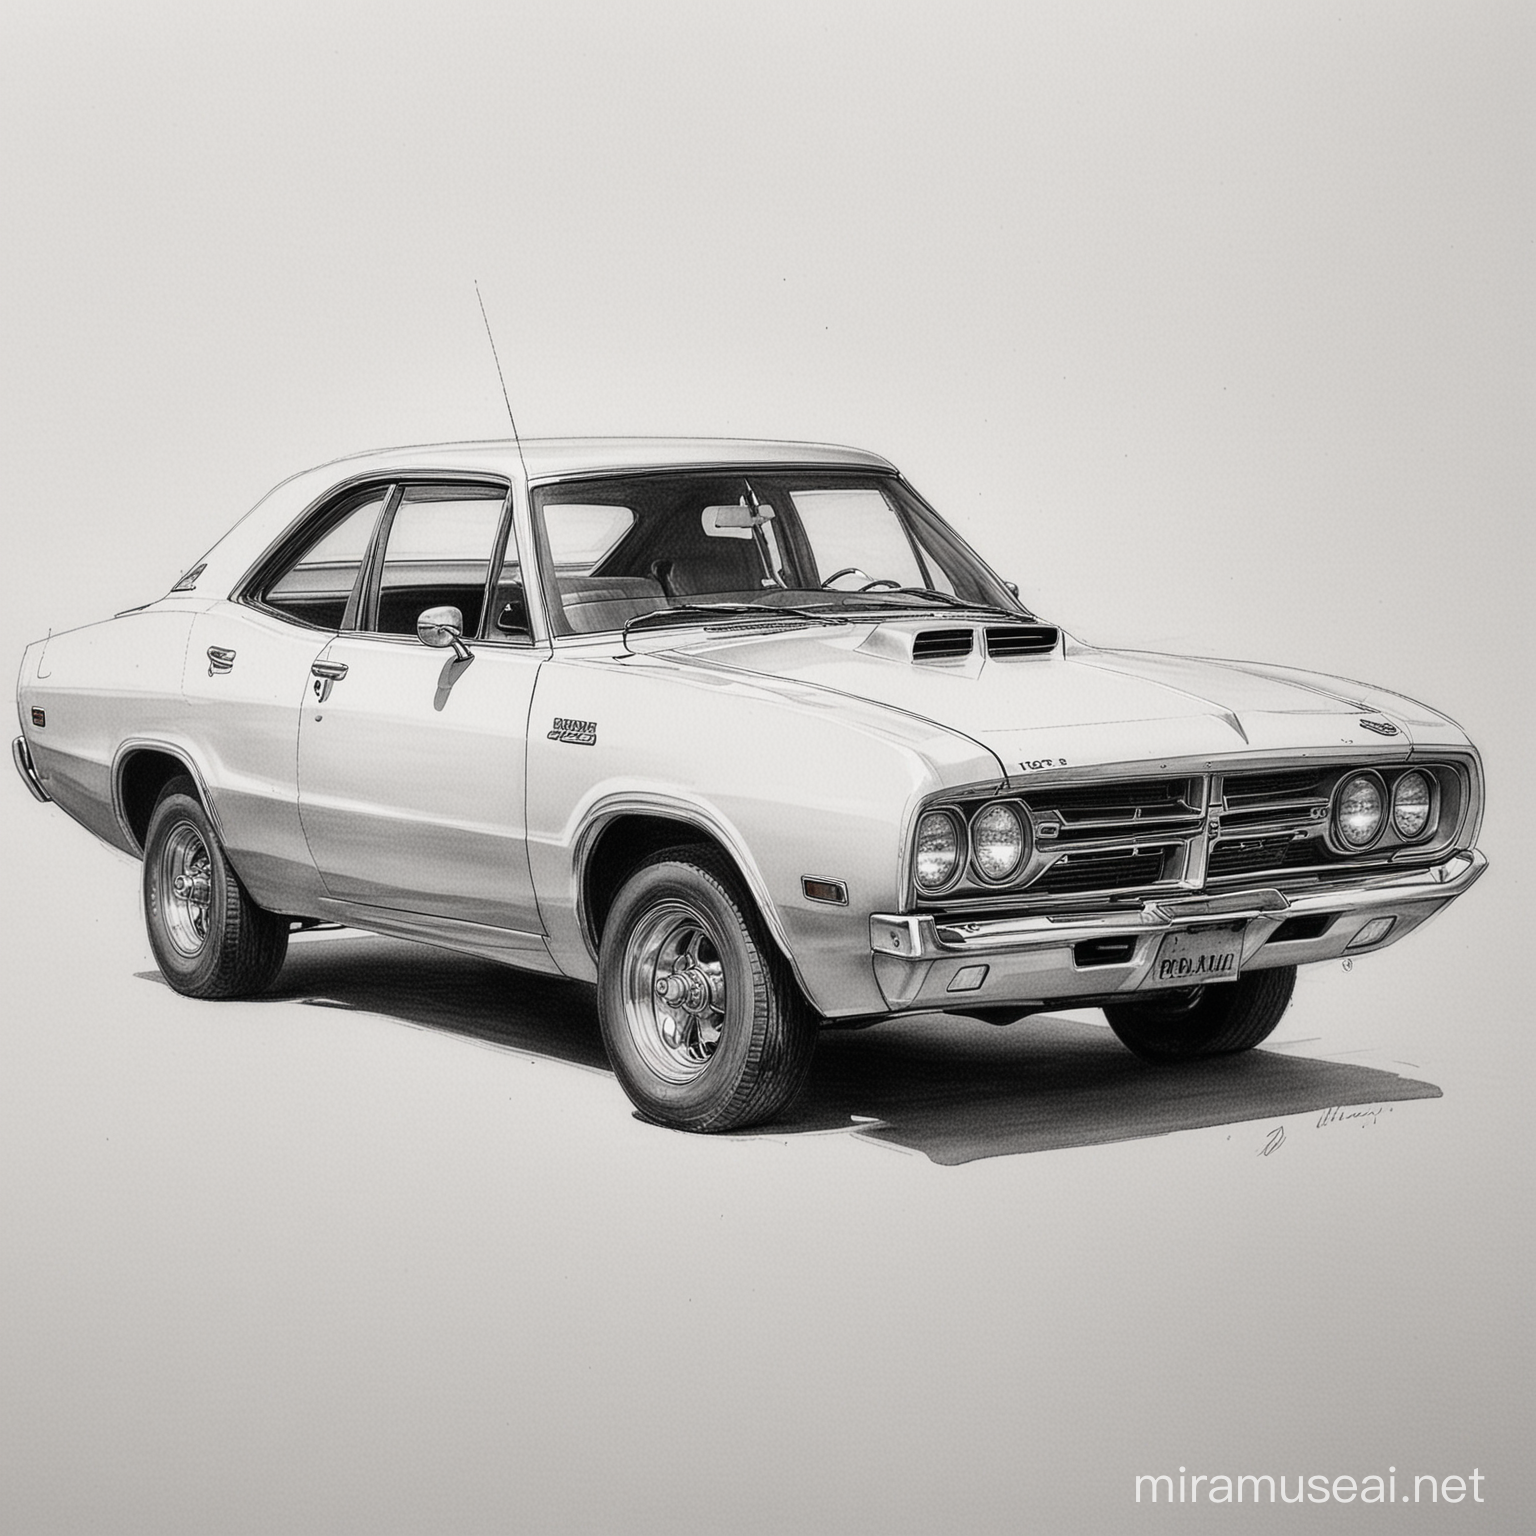 A sketch drawing of a Dodge Parola. black and white, pencil, paper